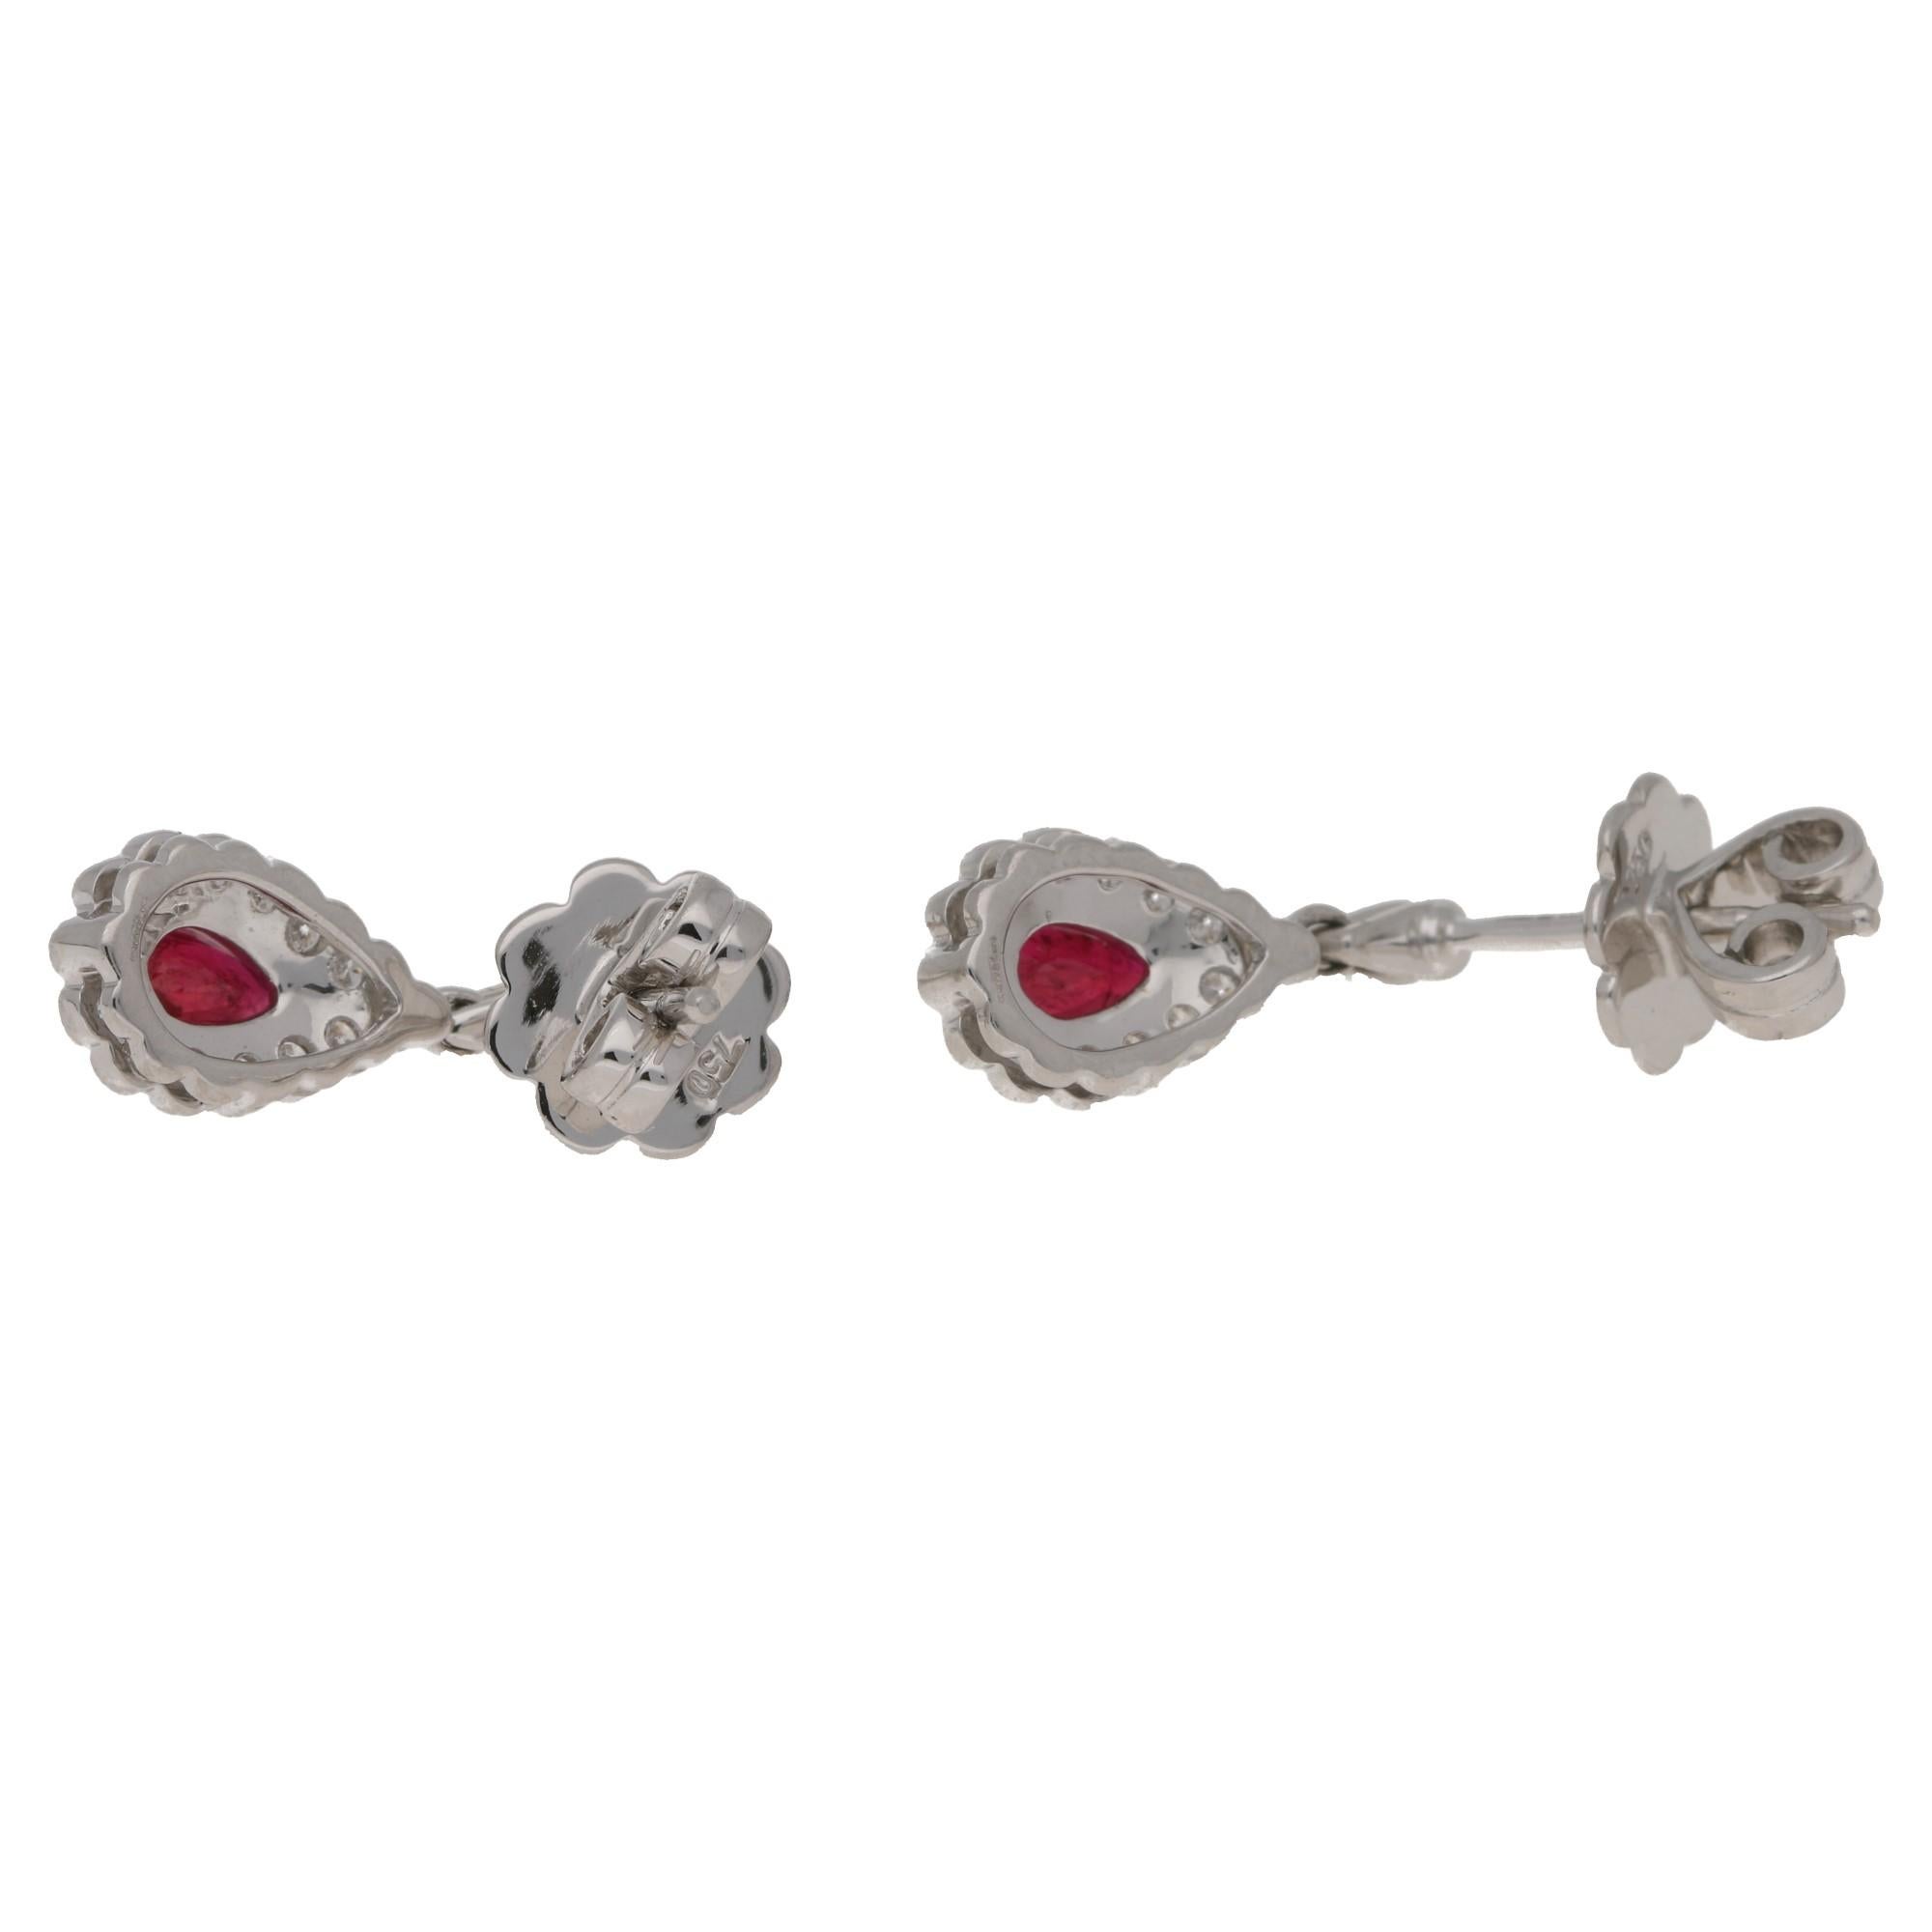 A classic pair of 18k white gold ruby and diamond drop earrings. The rubies total 0.92cts and the diamonds 0.43, set in 18k white gold. On a classic post and butterfly fitting. The earrings measure 18mm by 8mm approximately.